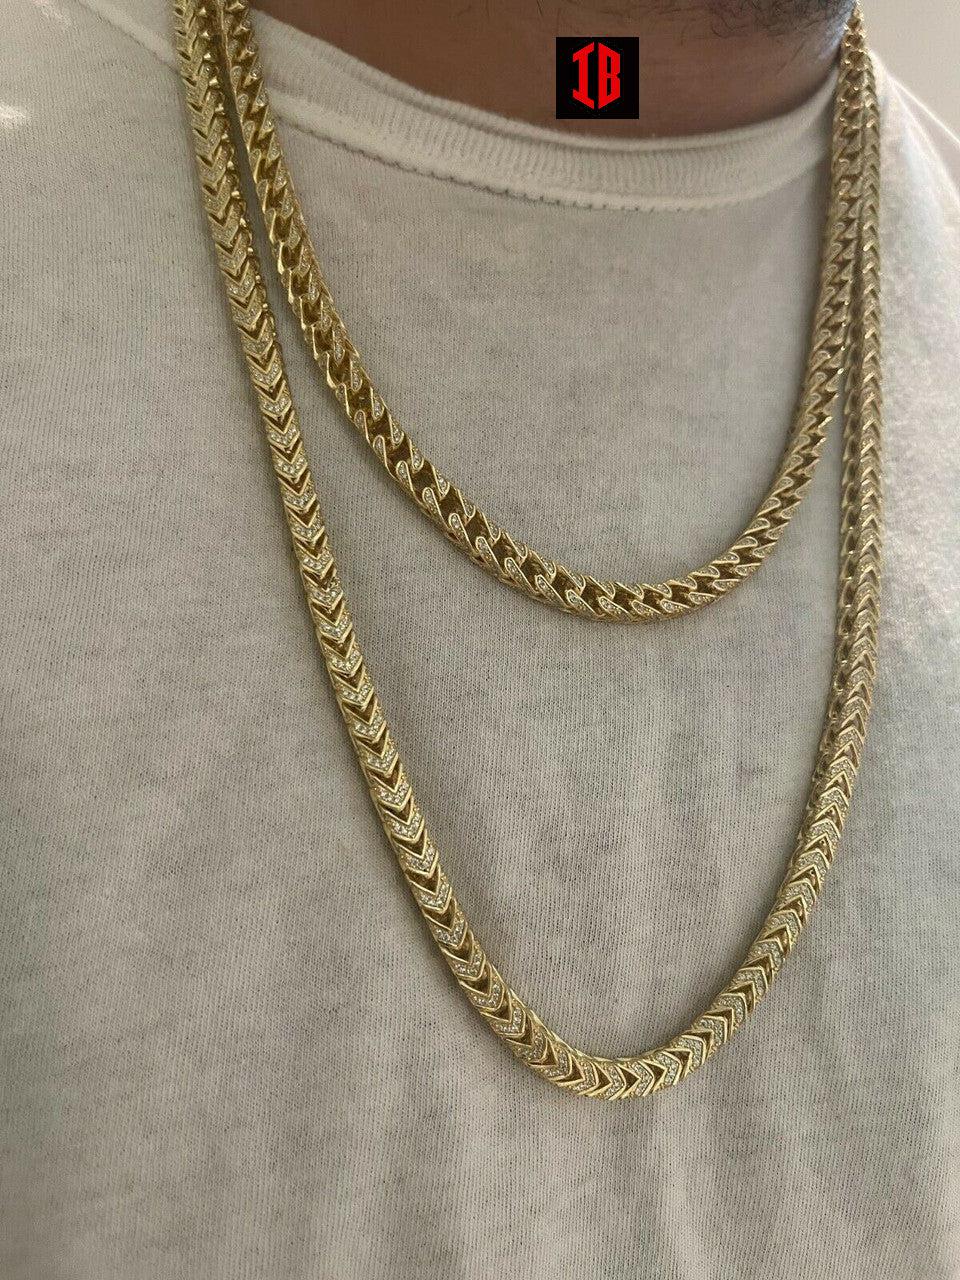 14k YELLOW Gold Over Real 925 Silver Men's Franco Chain 6mm Thick ICED Diamond 18-30"